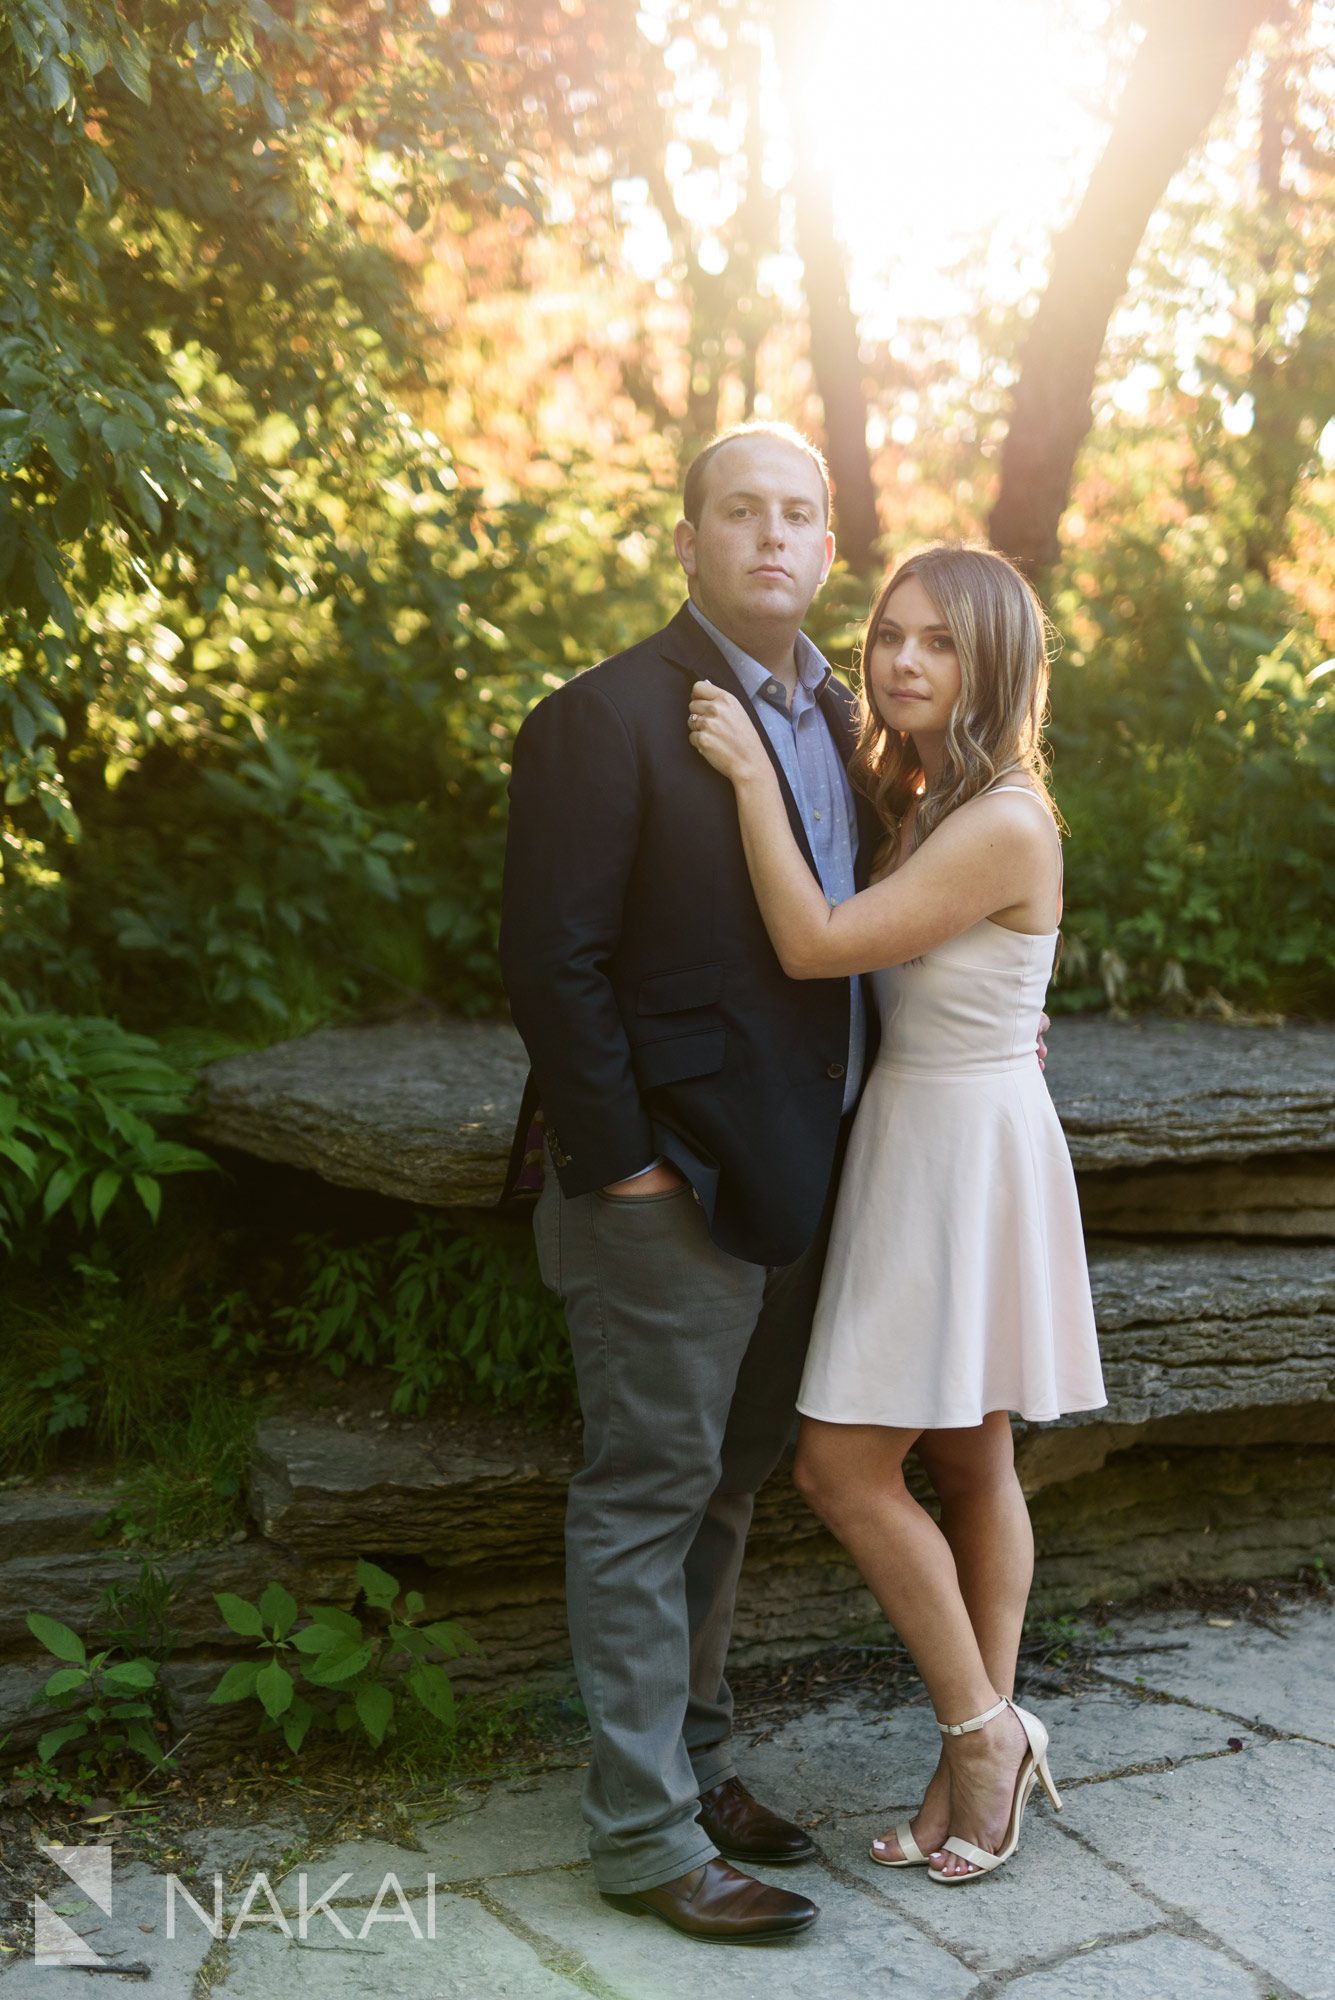 caldwell lily pool engagement photos chicago Lincoln park 